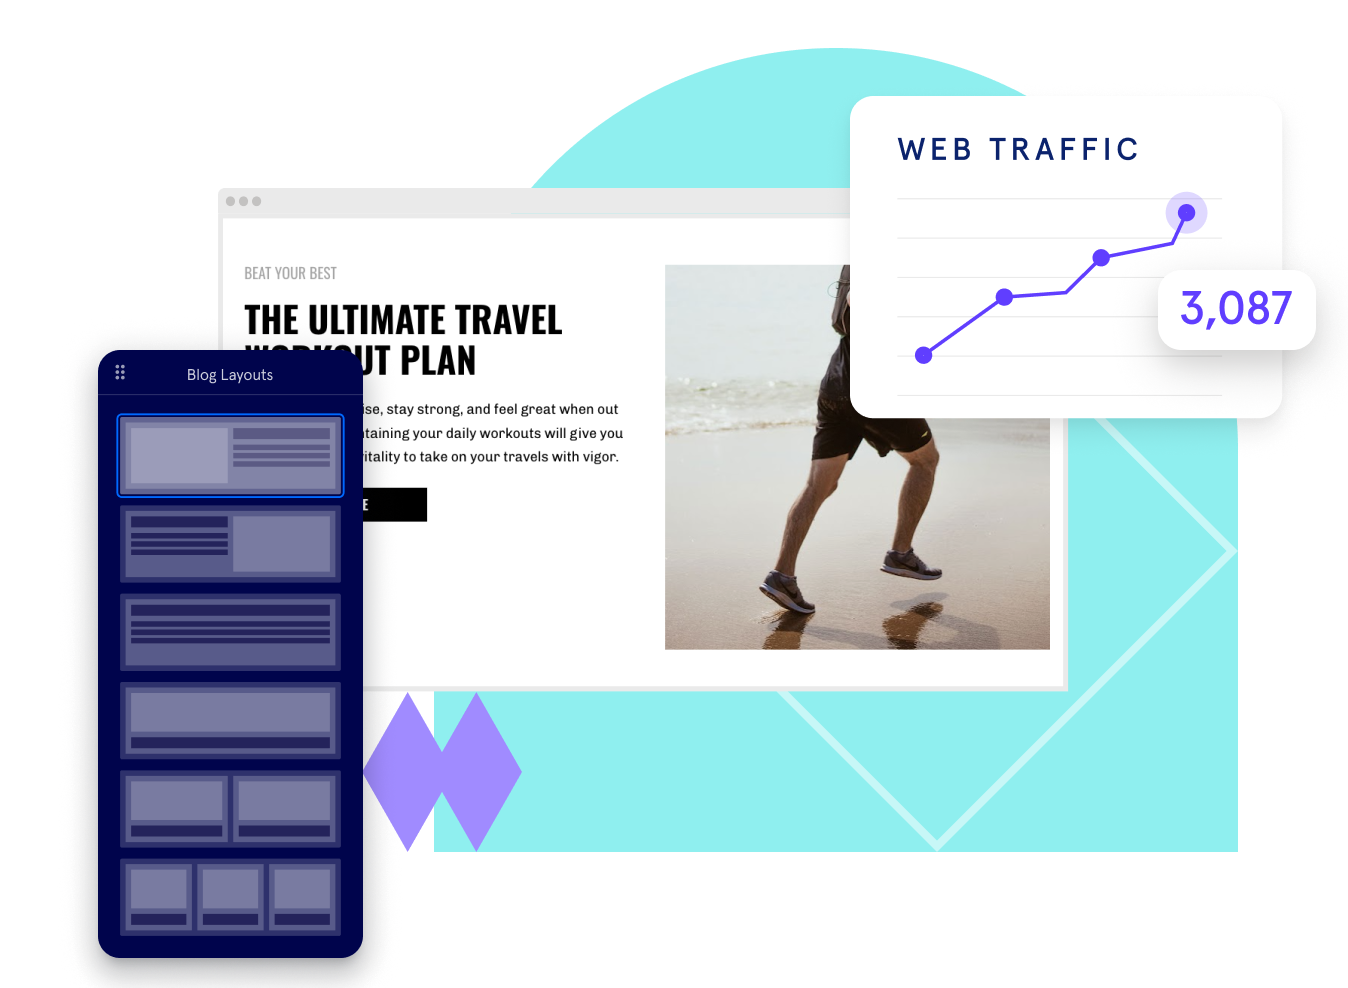 blog layout selection and web traffic growth leadpages interface